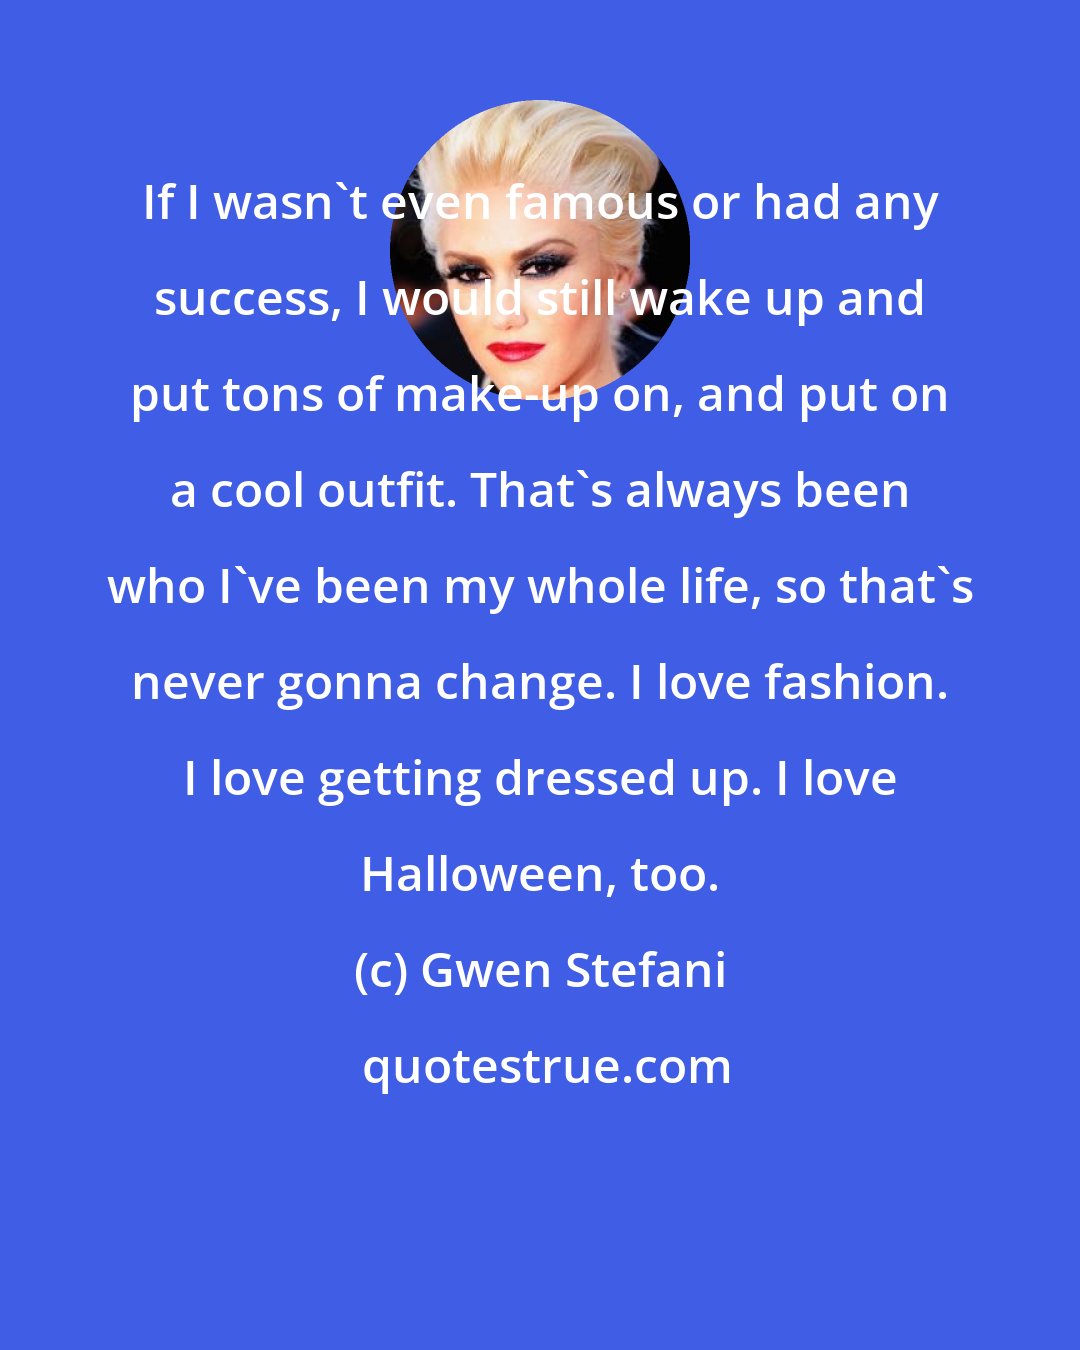 Gwen Stefani: If I wasn't even famous or had any success, I would still wake up and put tons of make-up on, and put on a cool outfit. That's always been who I've been my whole life, so that's never gonna change. I love fashion. I love getting dressed up. I love Halloween, too.